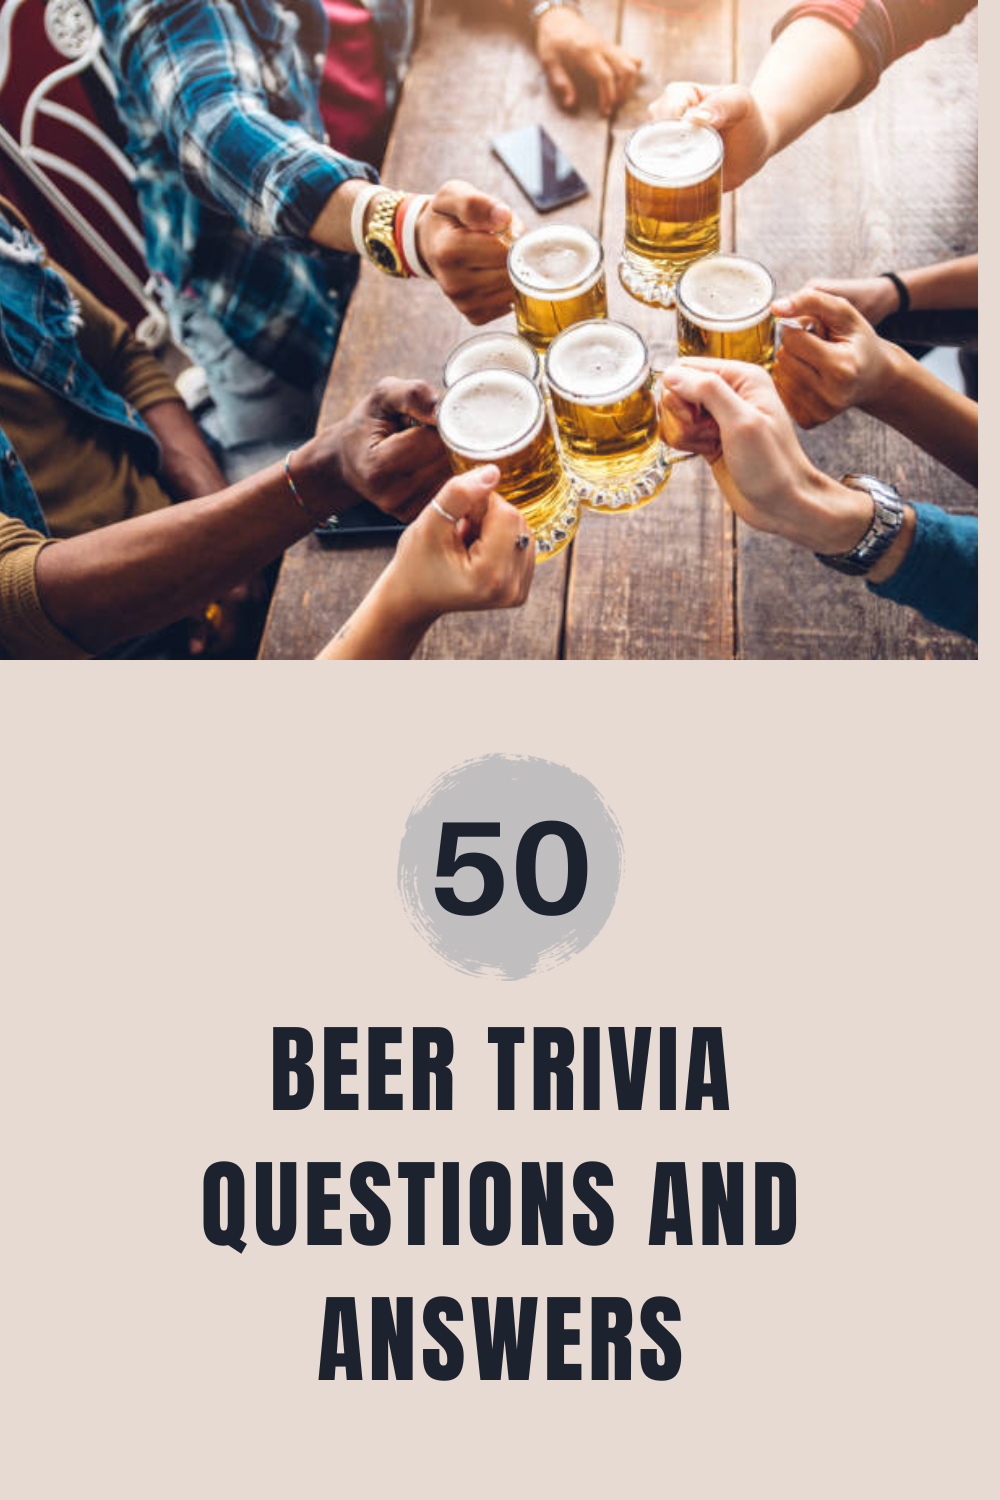 50 Beer Trivia Questions and Answers